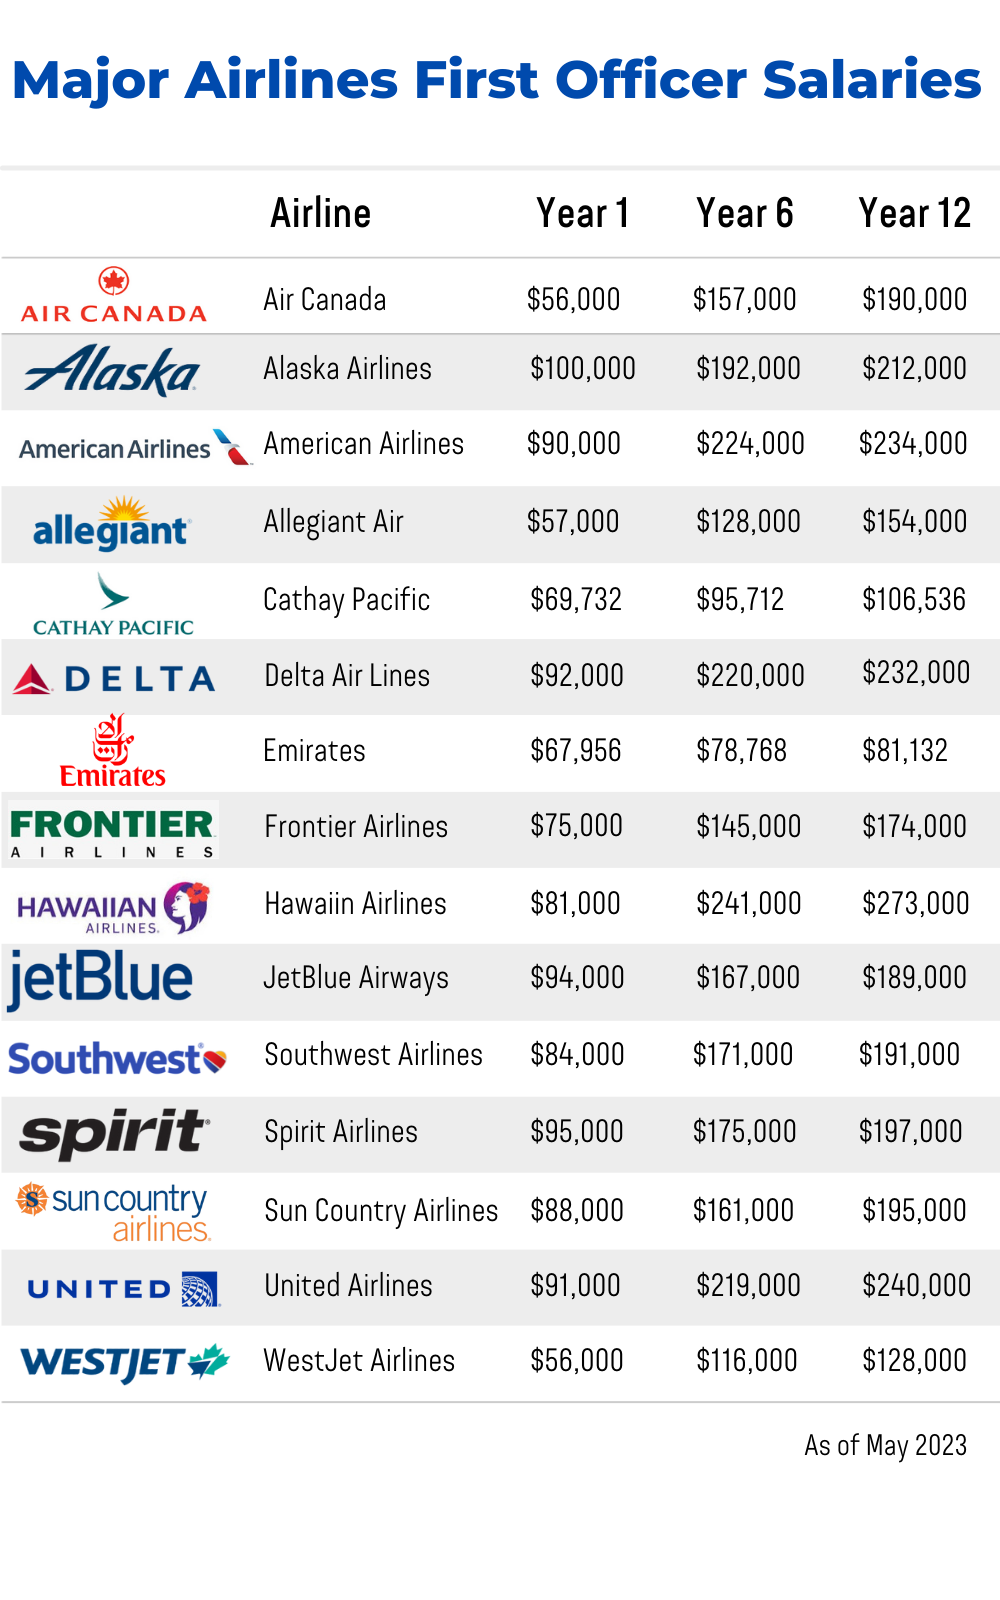 May 2023 Major Airlines First Officer Salaries